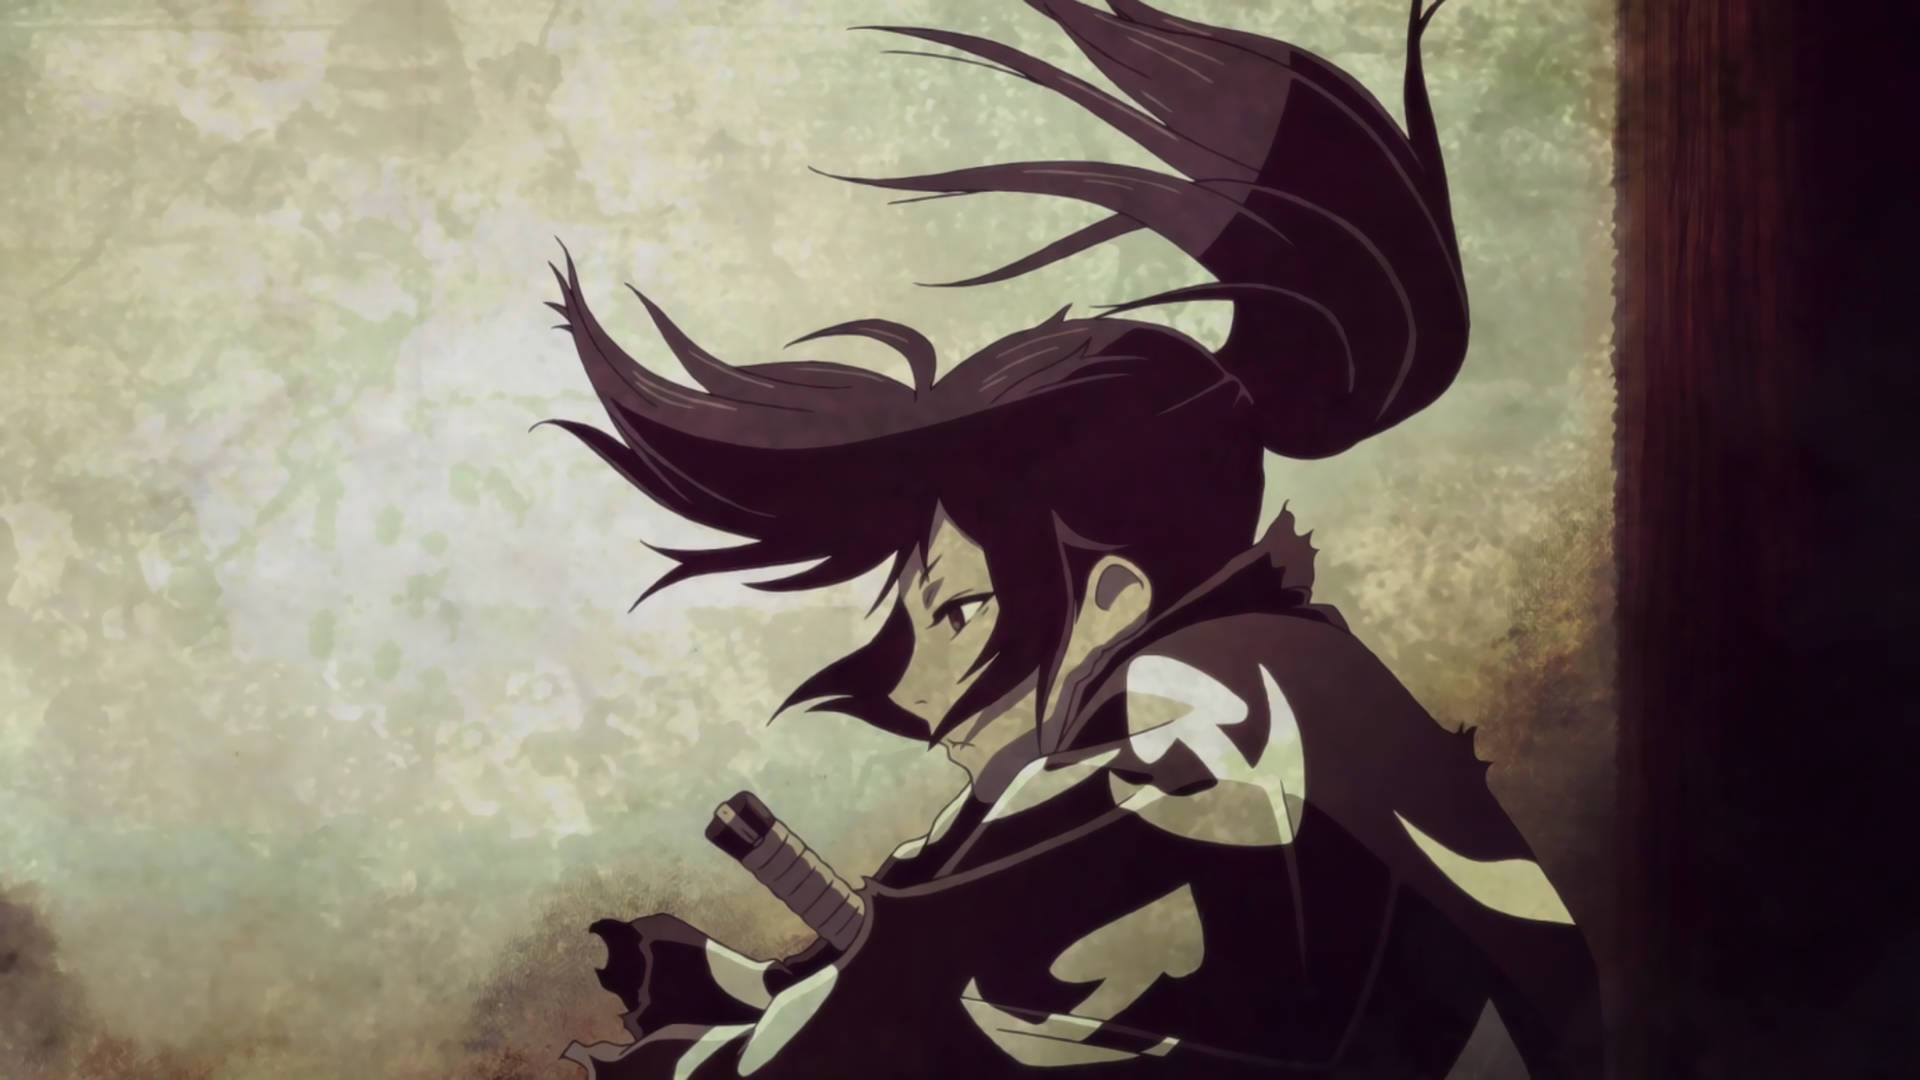 Hyakkimaru, the main protagonist of Dororo, with his swords and armor ready to fight. Wallpaper